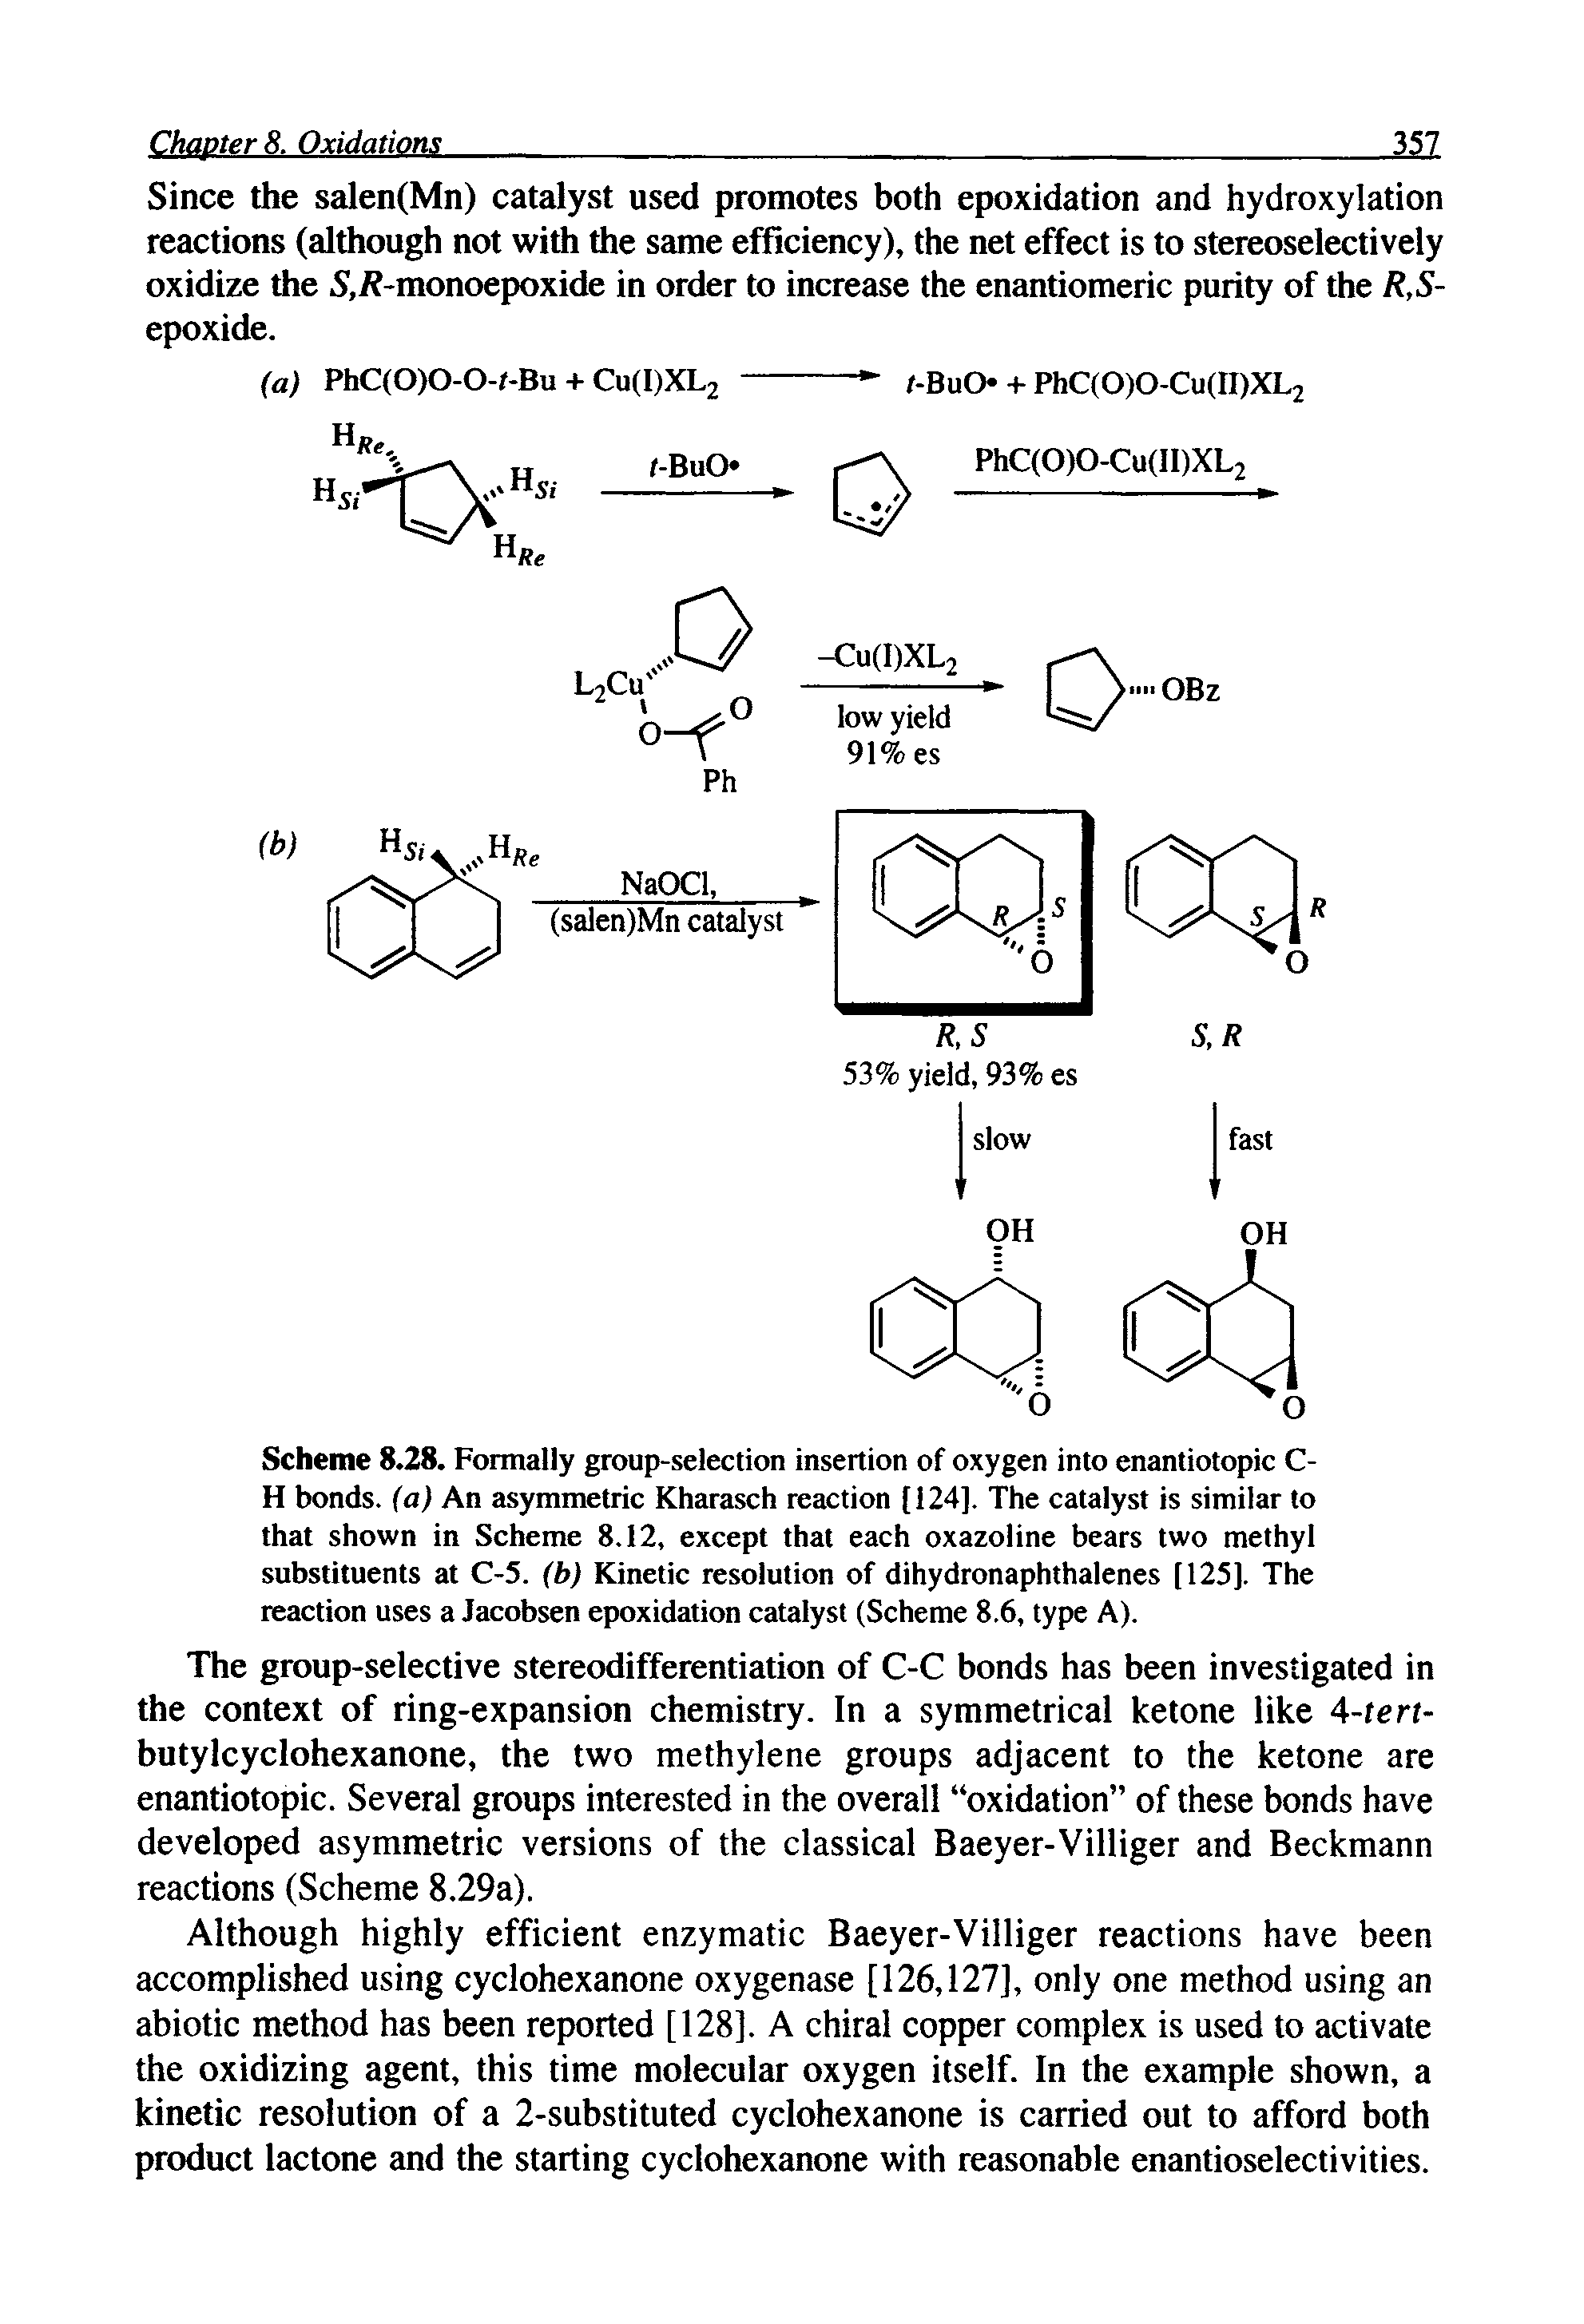 Scheme 8.28. Formally group-selection insertion of oxygen into enantiotopic C-H bonds, (a) An asymmetric Kharasch reaction [124], The catalyst is similar to that shown in Scheme 8.12, except that each oxazoline bears two methyl substituents at C-5. (b) Kinetic resolution of dihydronaphthalenes [125]. The reaction uses a Jacobsen epoxidation catalyst (Scheme 8.6, type A).